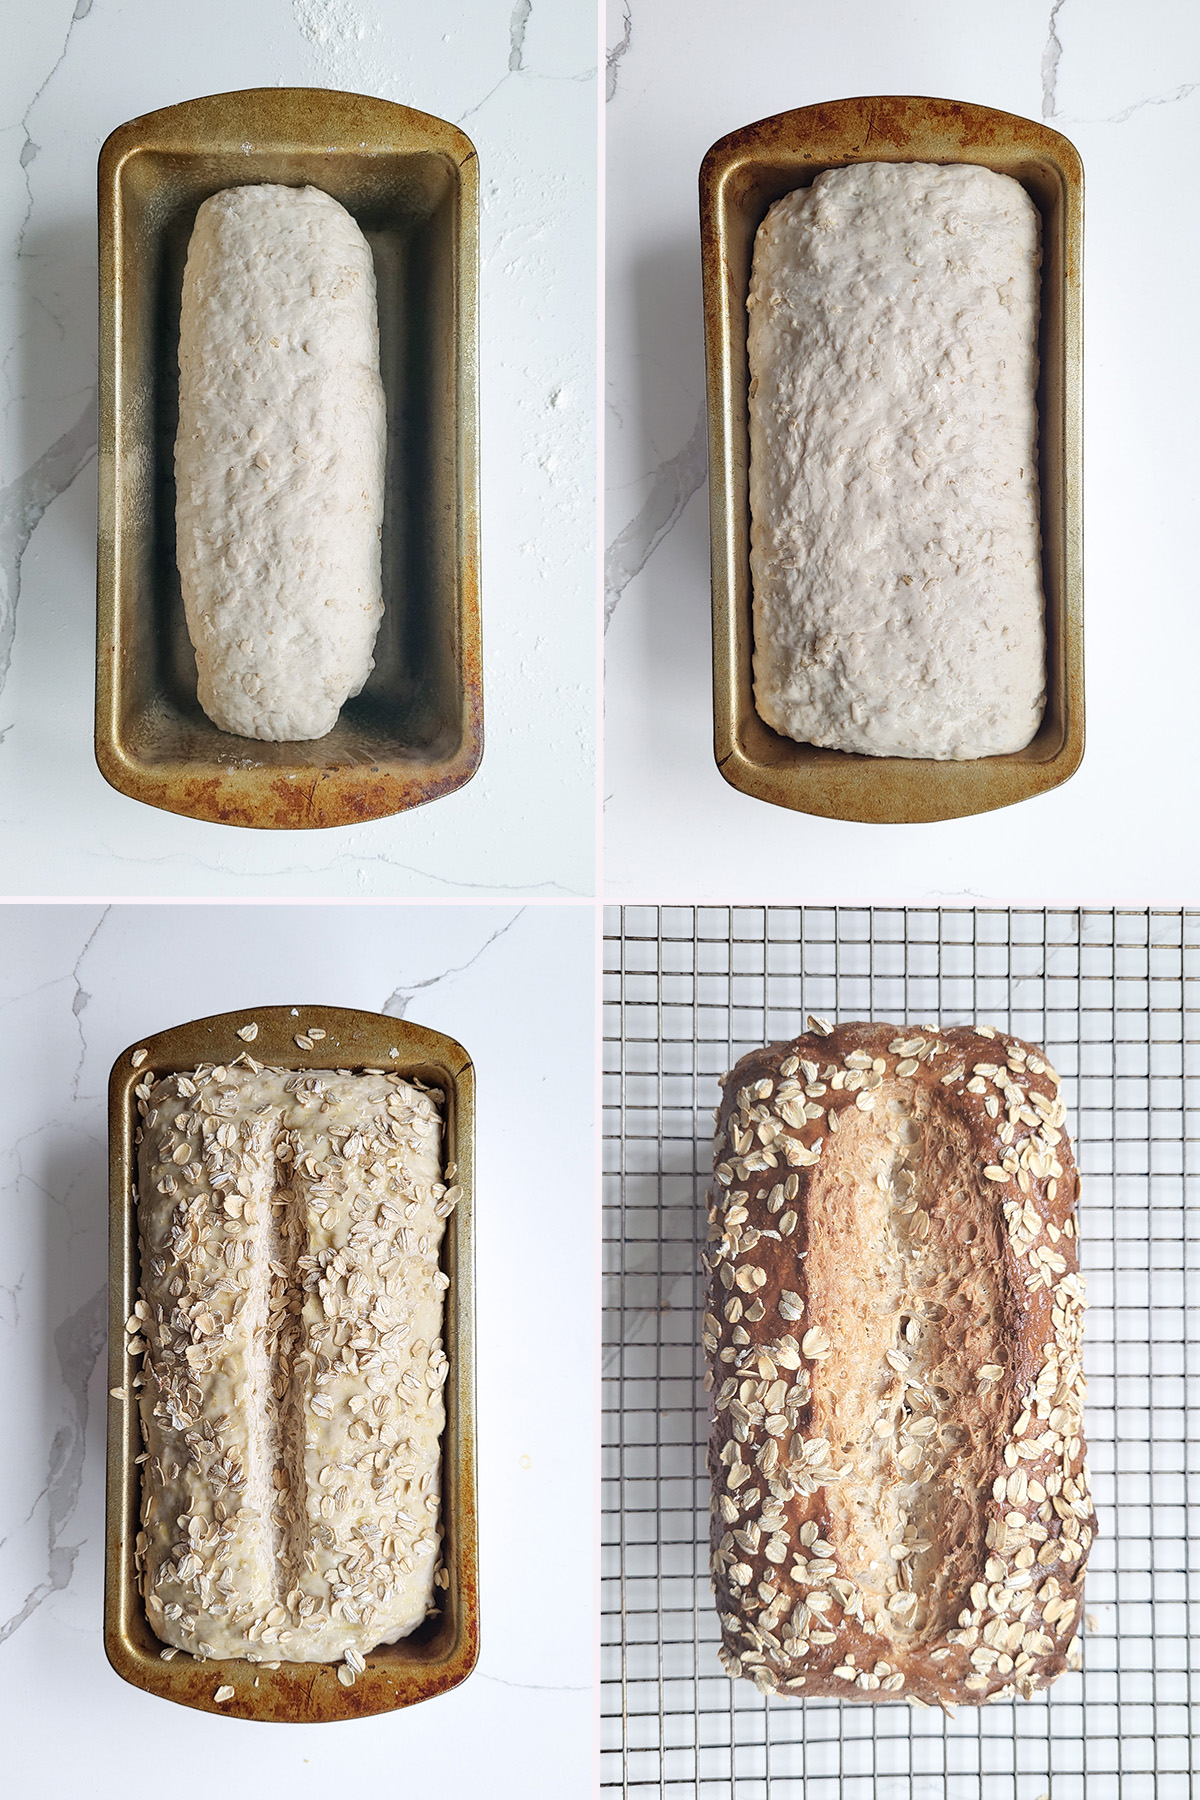 sourdough oatmeal bread before and after rising and baking.